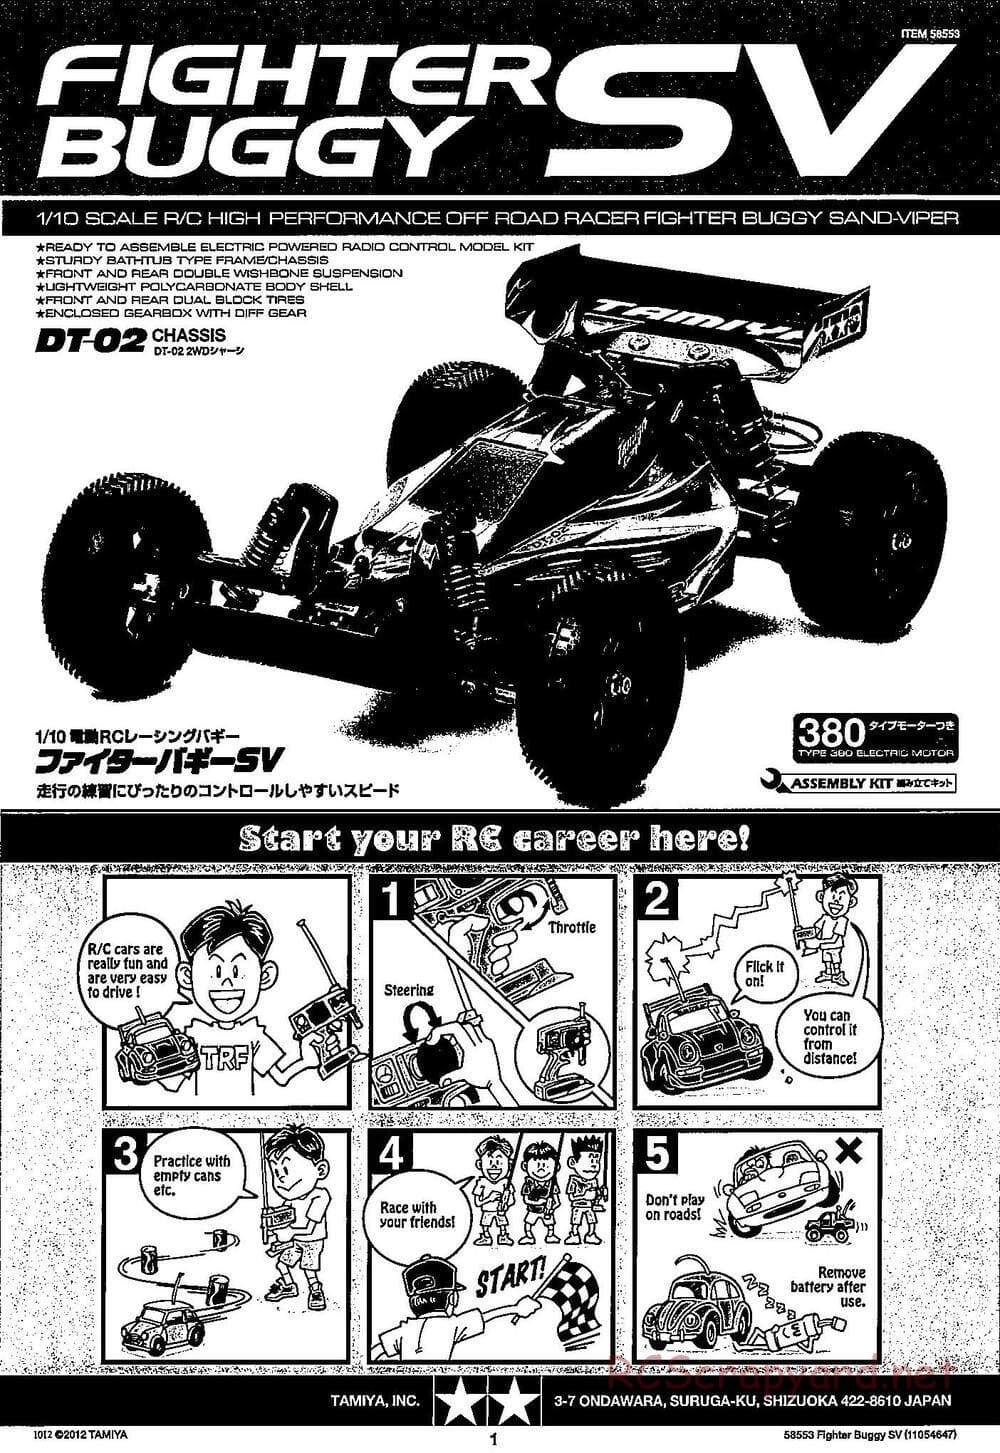 Tamiya - Fighter Buggy SV Chassis - Manual - Page 1